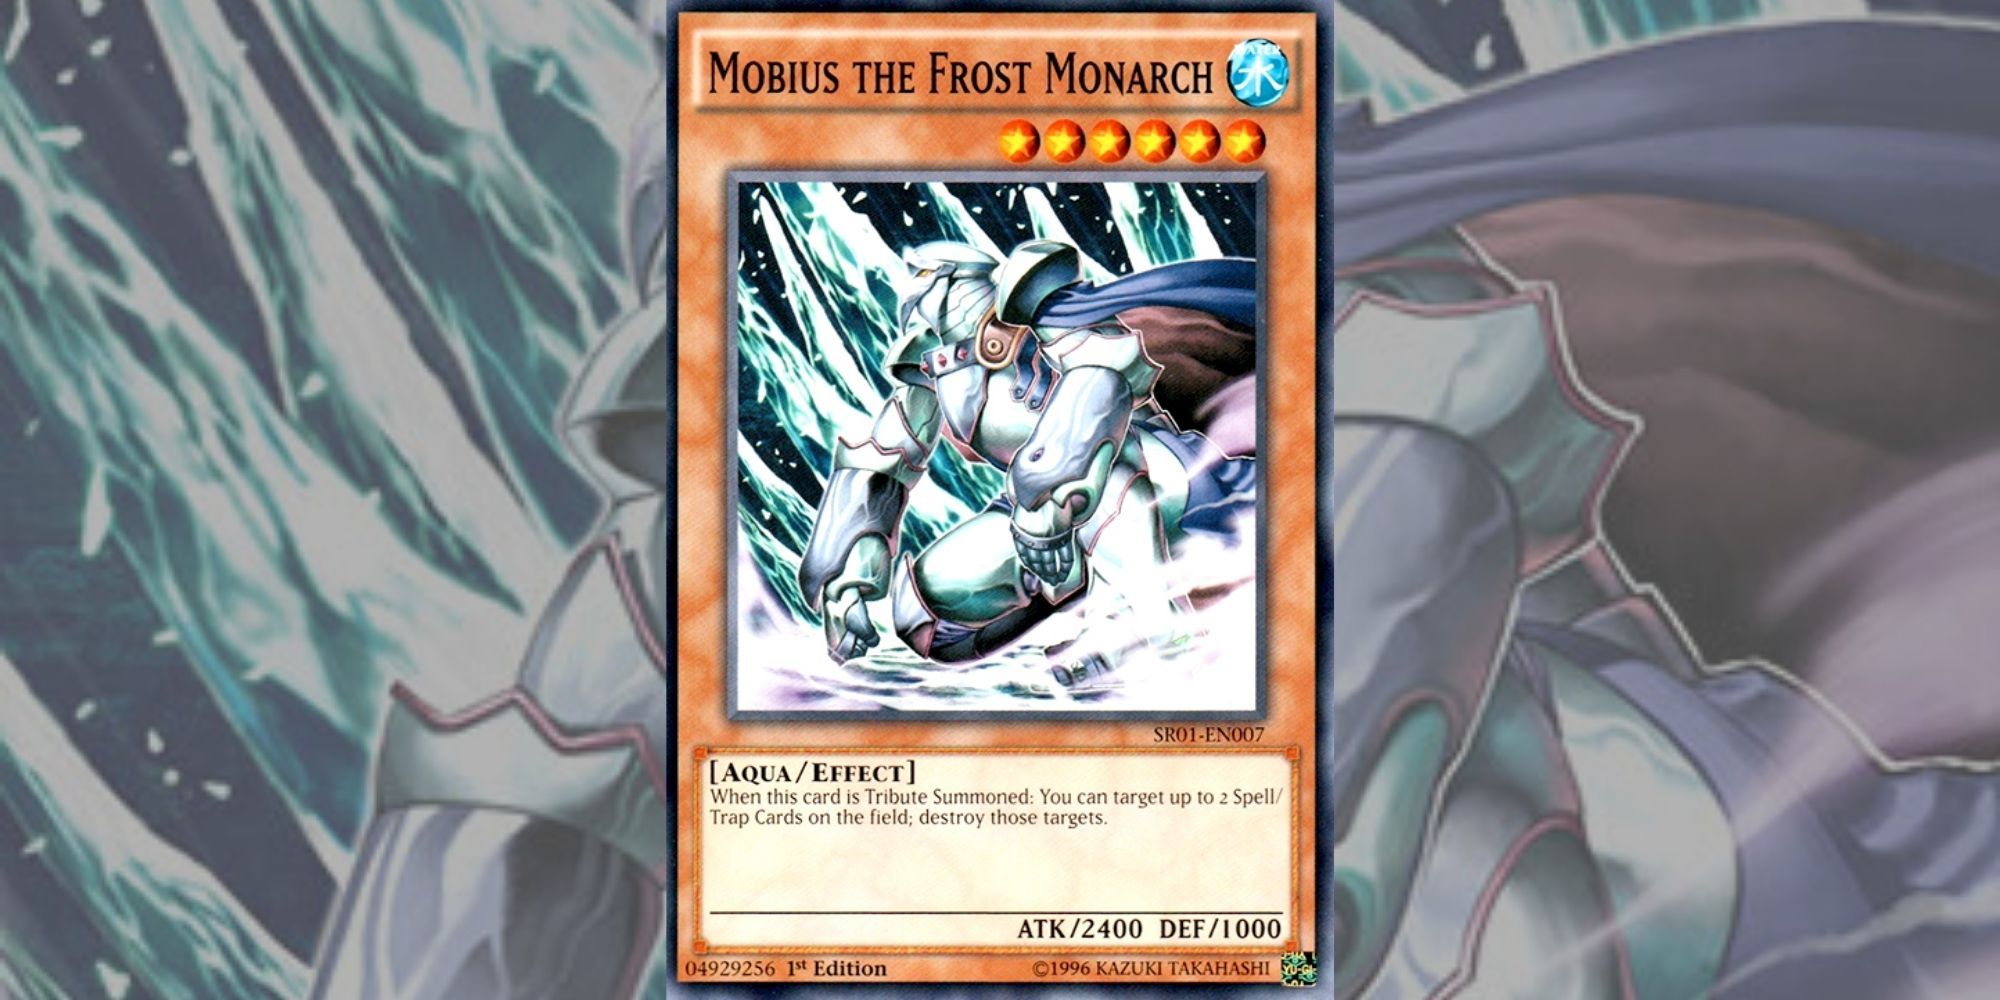 Yu-Gi-Oh! Card Mobius the Frost Monarch against background made from card art.